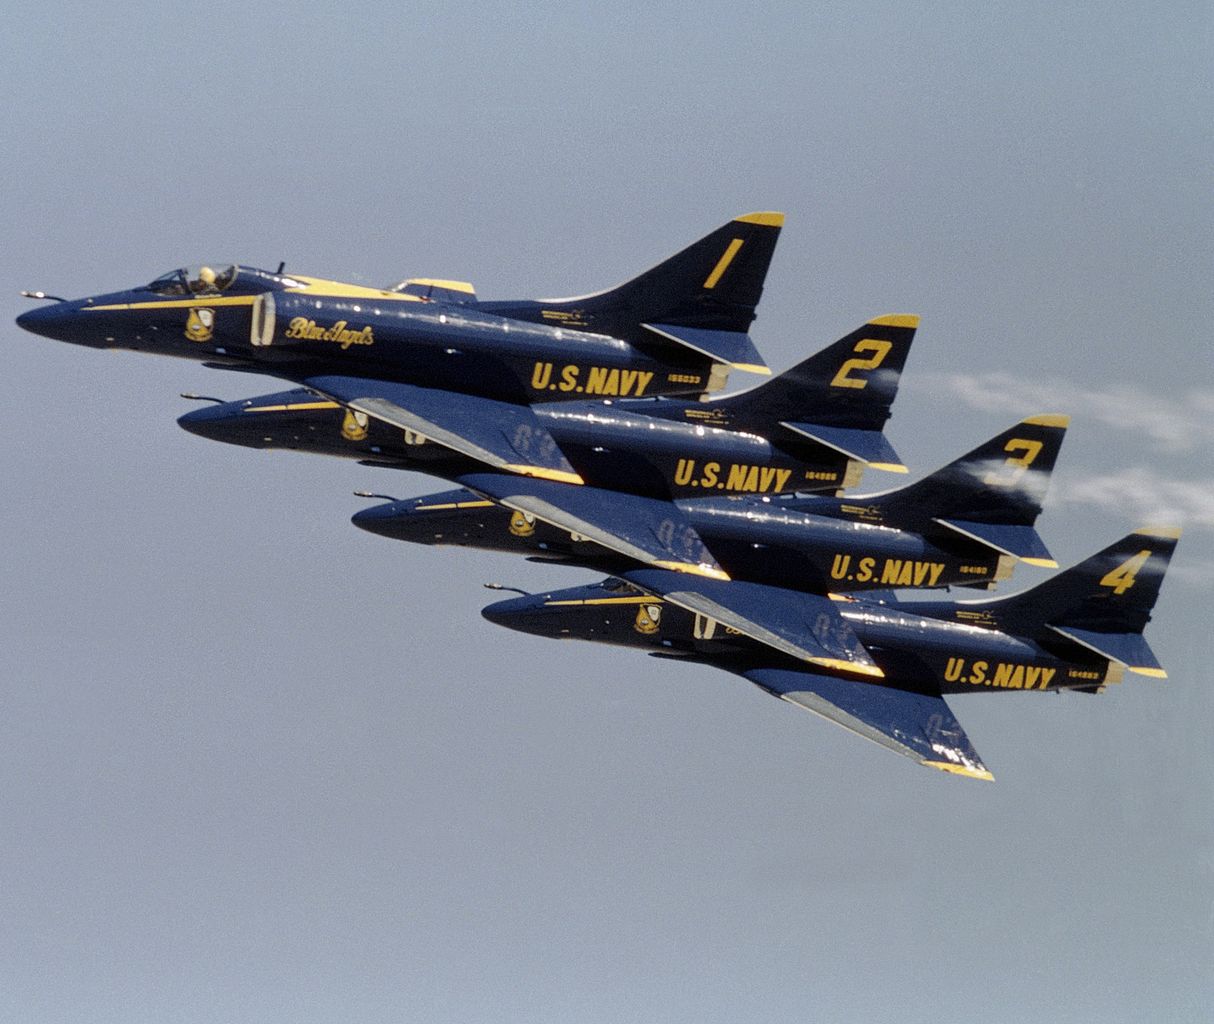  The nimble Douglas A-4 Skyhawk was pressed into service in the early years of the Vietnam War. From 1974 to 1986 they were flown by the Blue Angels. &nbsp; &nbsp; &nbsp; &nbsp; &nbsp; &nbsp; &nbsp; &nbsp;  (U.S.   Defense Imagery)  